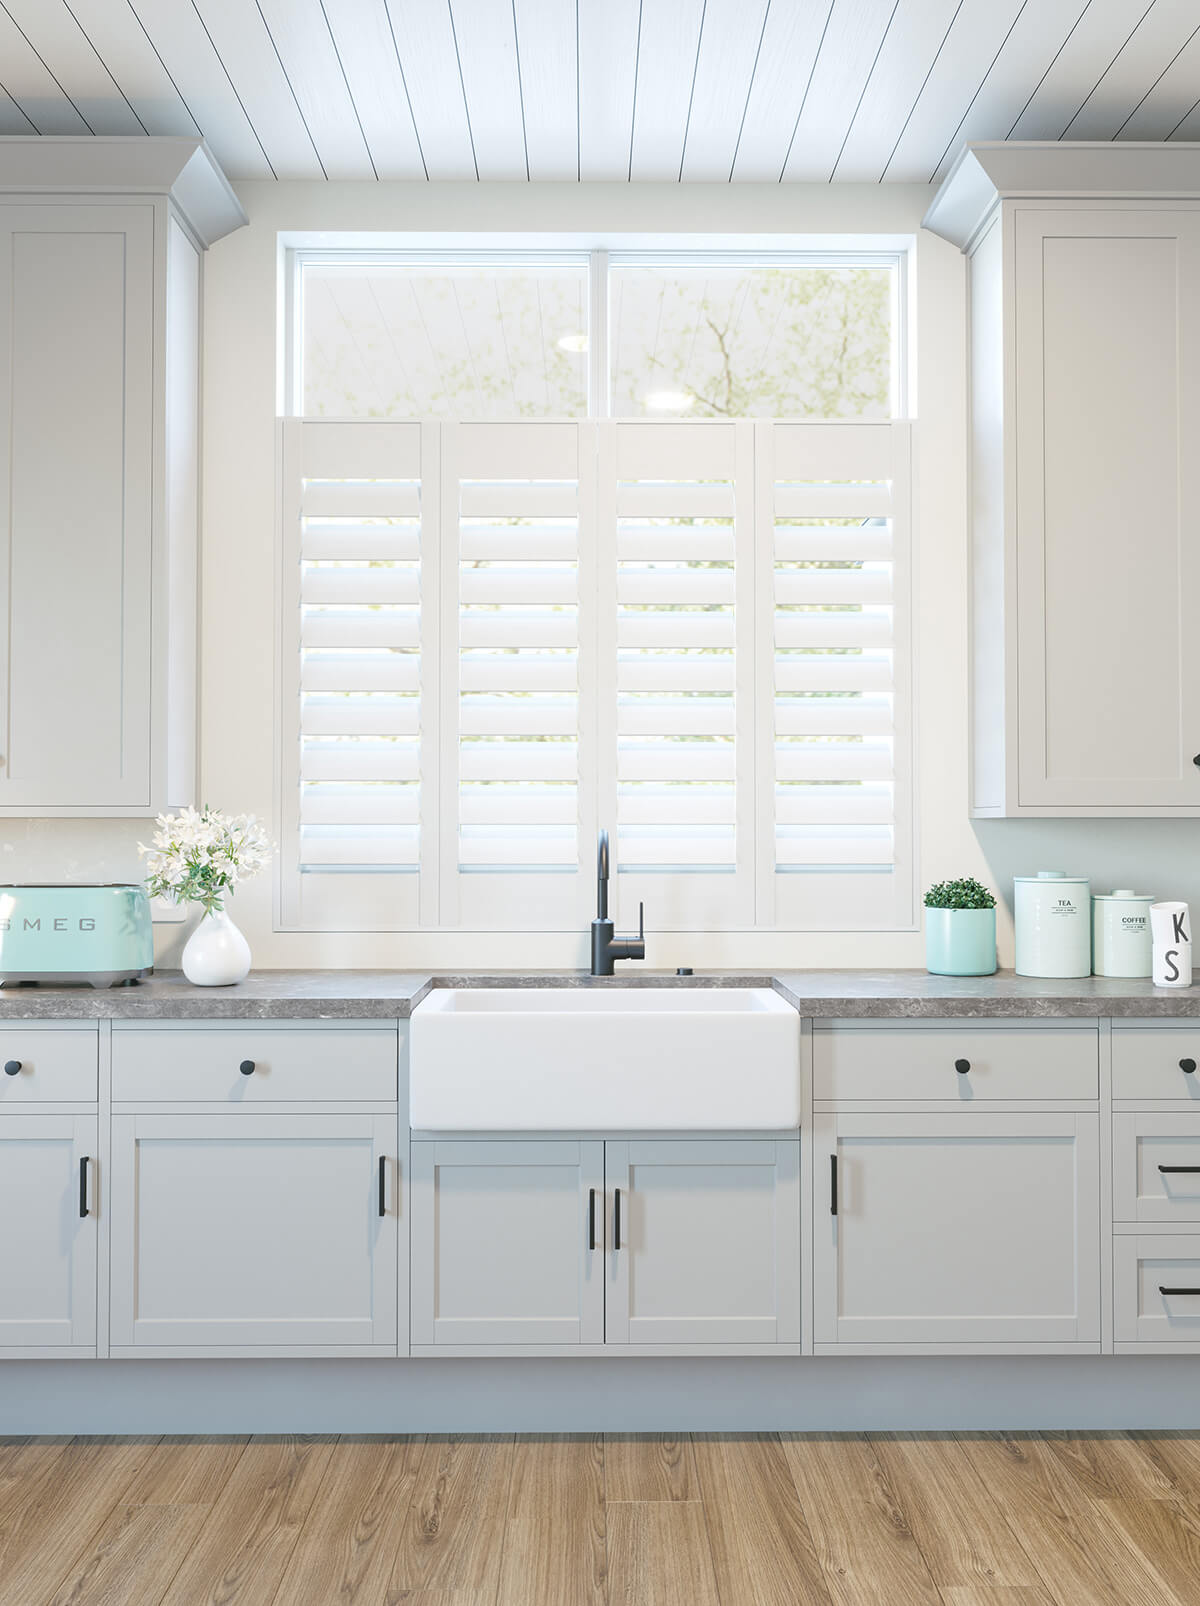 Suppliers of Customizable Plantation Shutters Designs UK